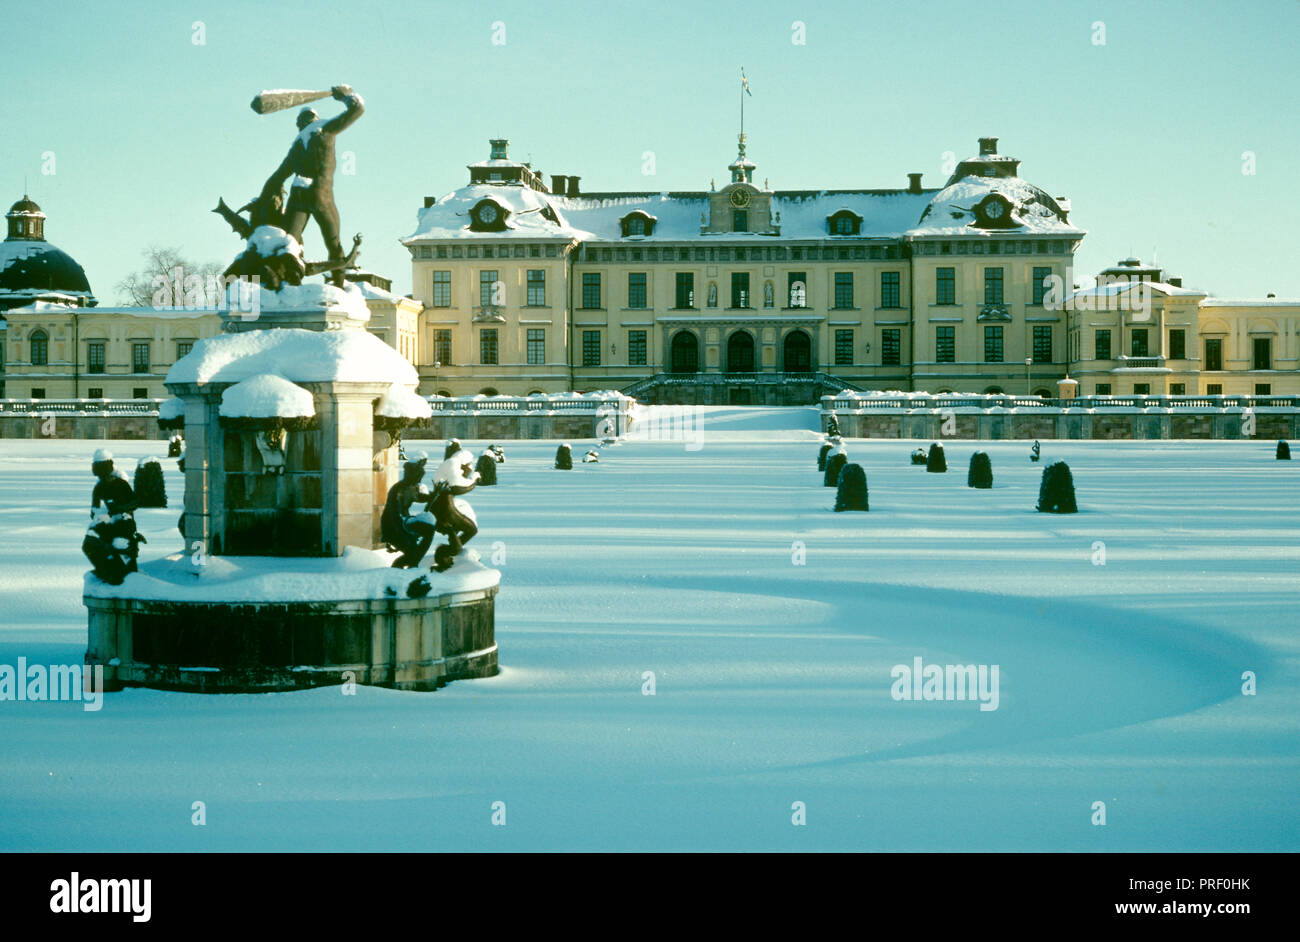 Drottningholm Castle, the home of the King and Queen of Sweden, located just outside Stockholm, Sweden Stock Photo